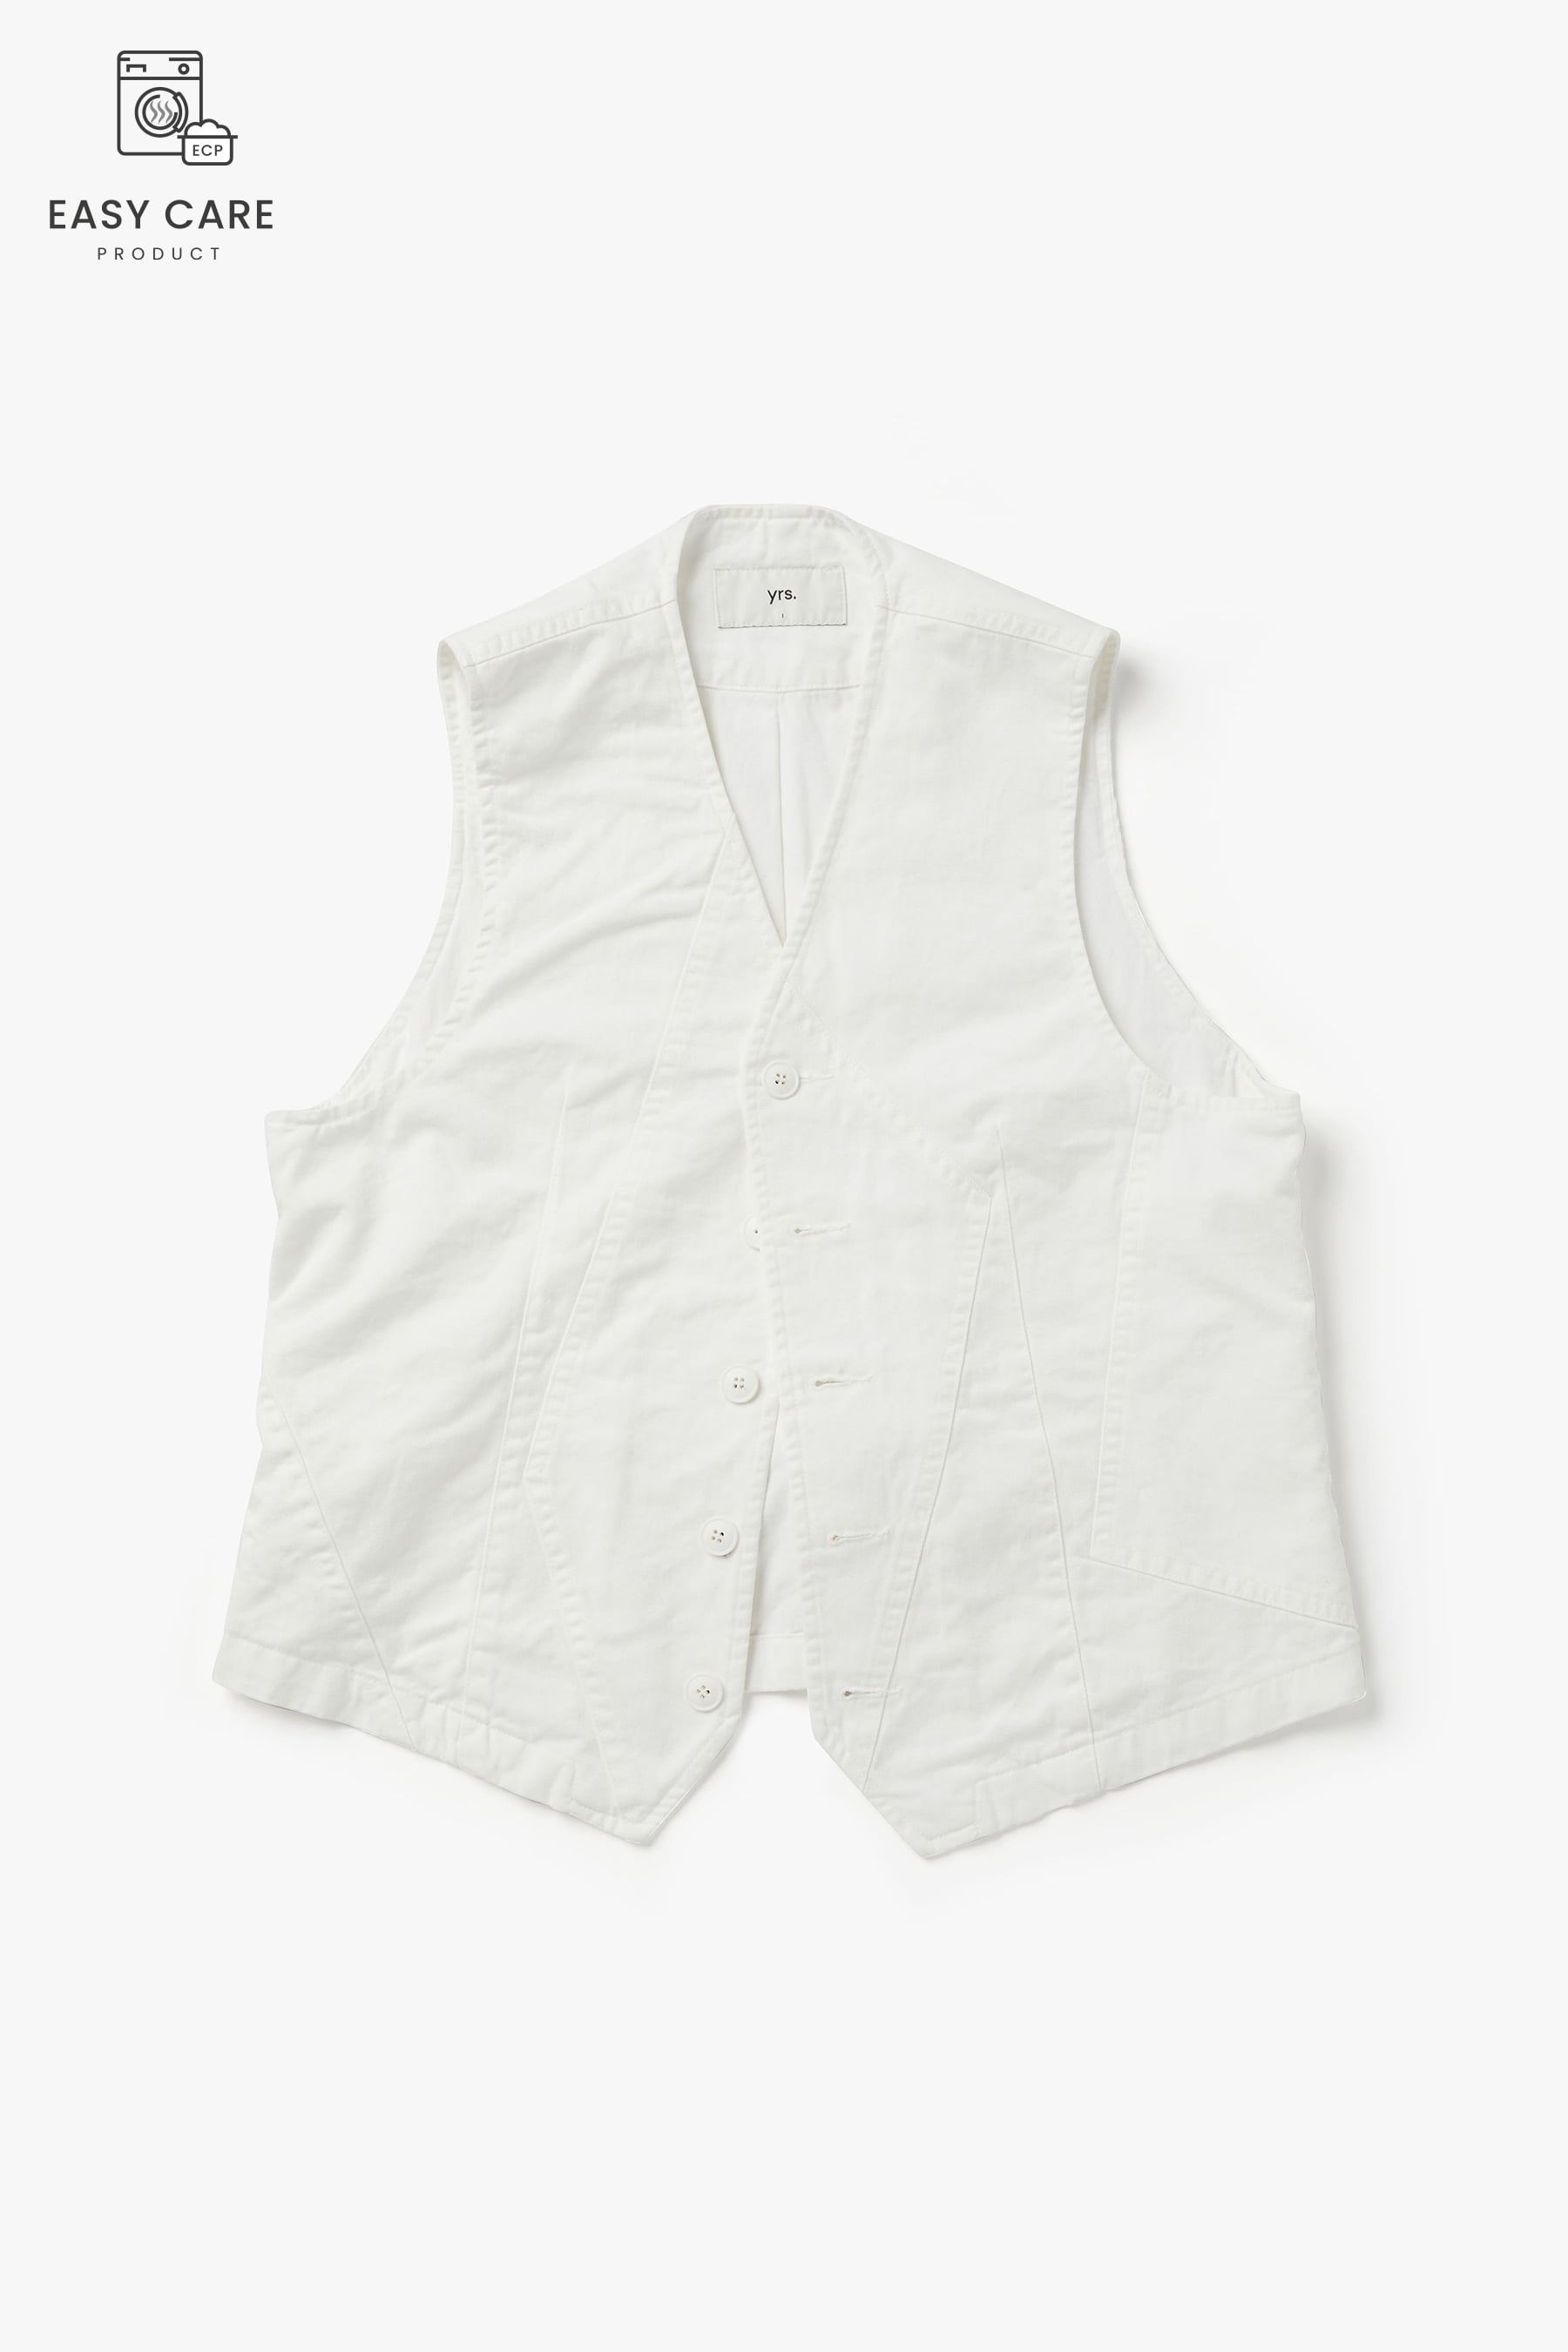 OFF WHITE PATCHWORK WASHED VEST (ECP GARMENT PROCESS)